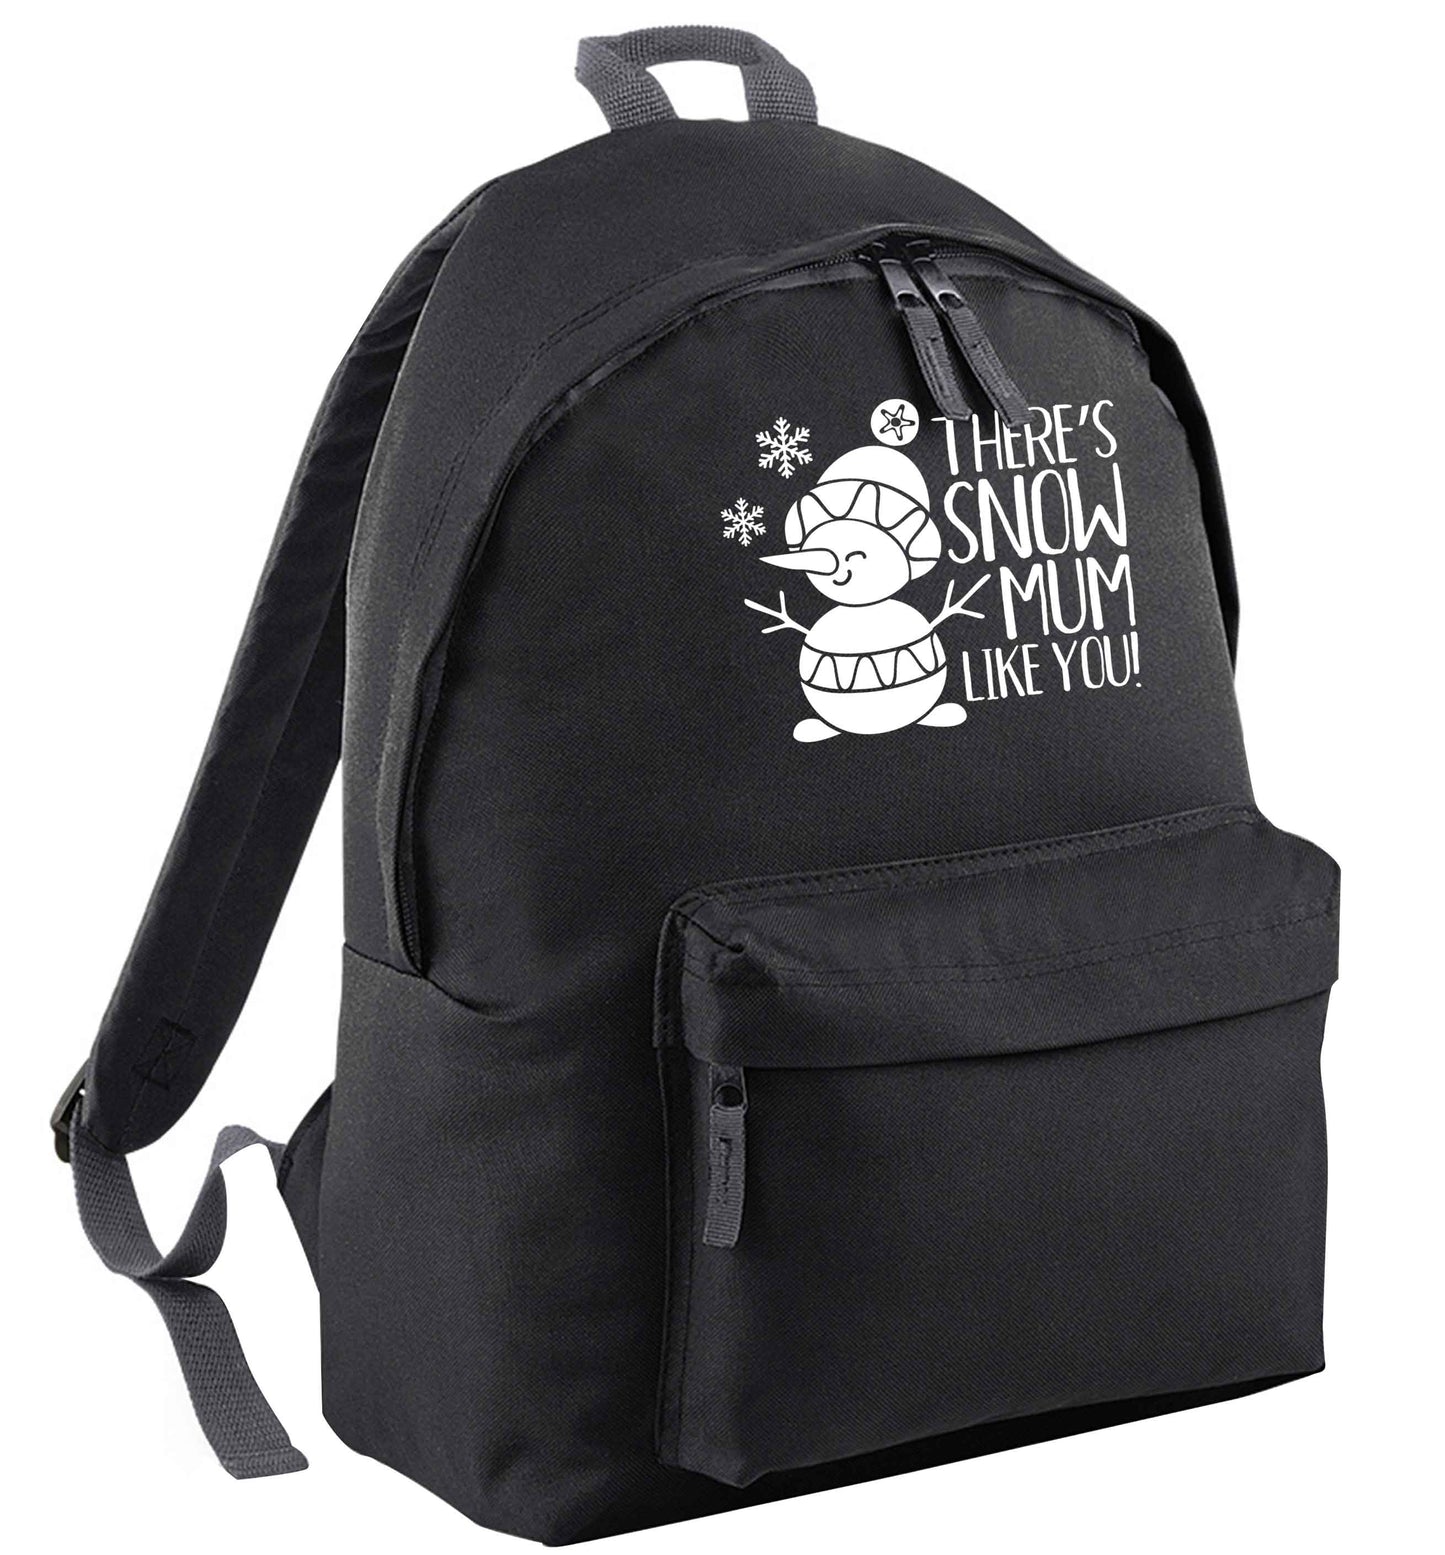 There's snow mum like you black adults backpack